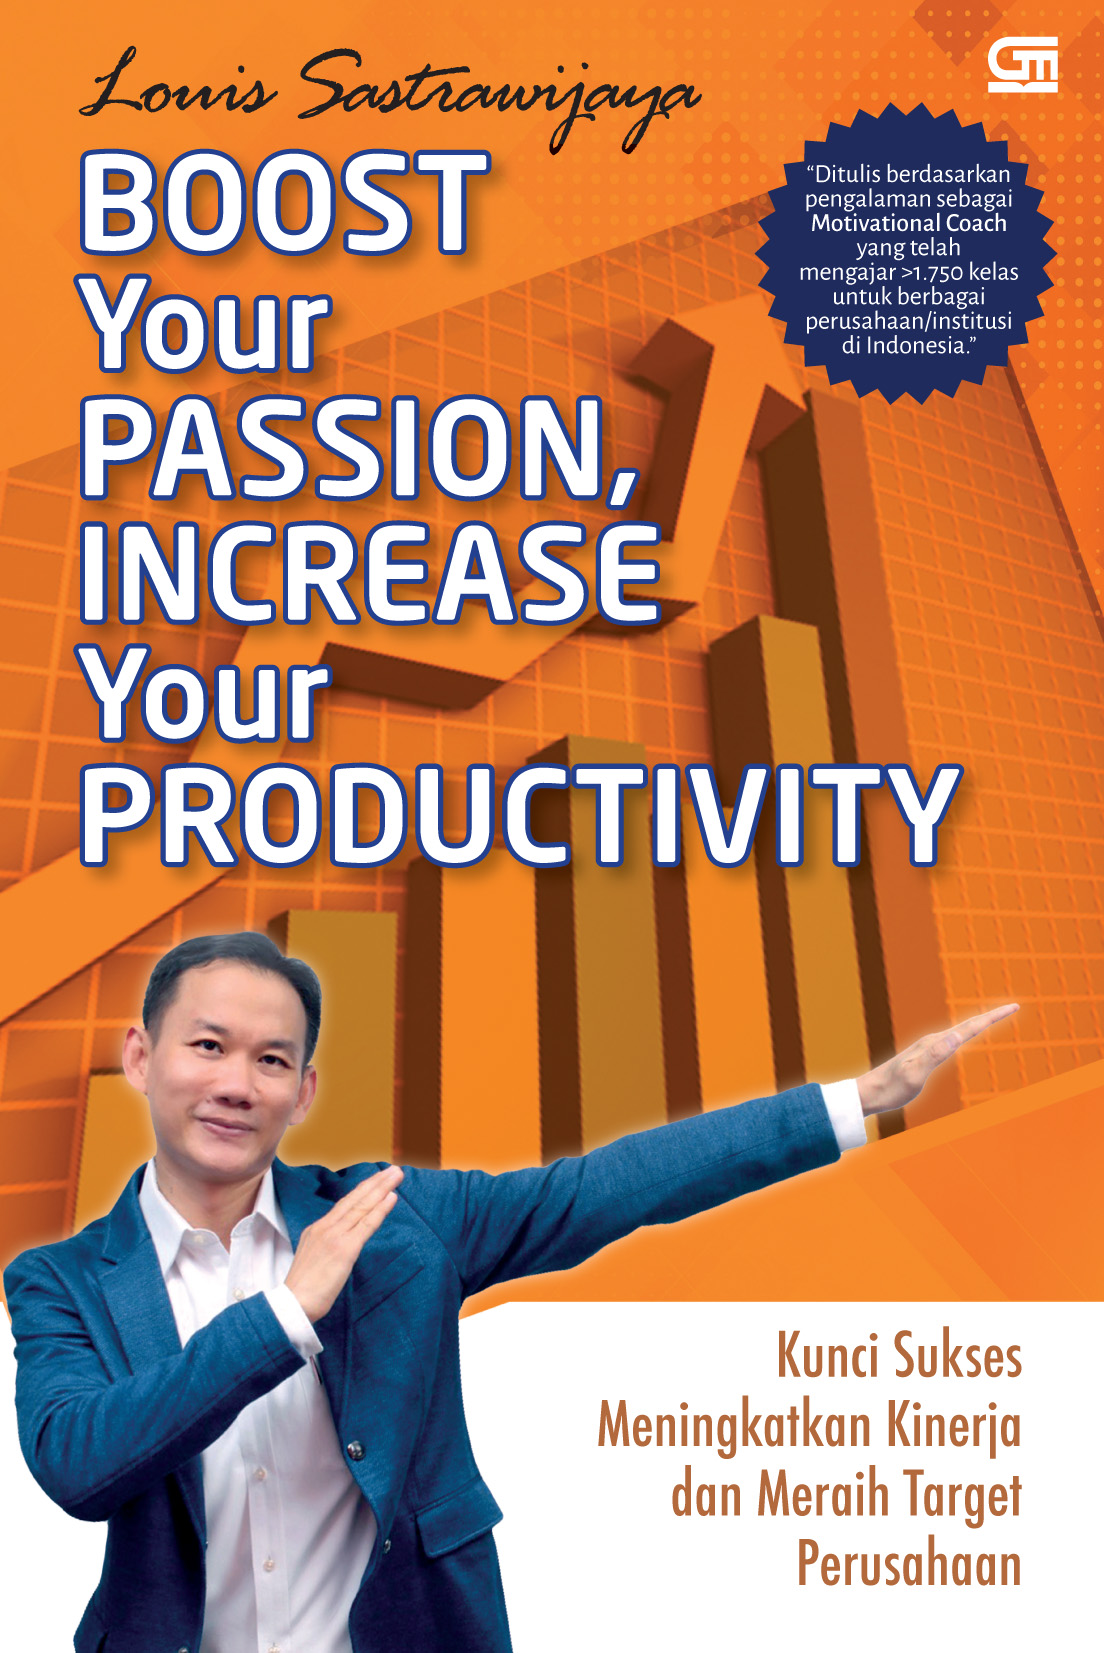 Boost Your Passion, Increase Your Productivity